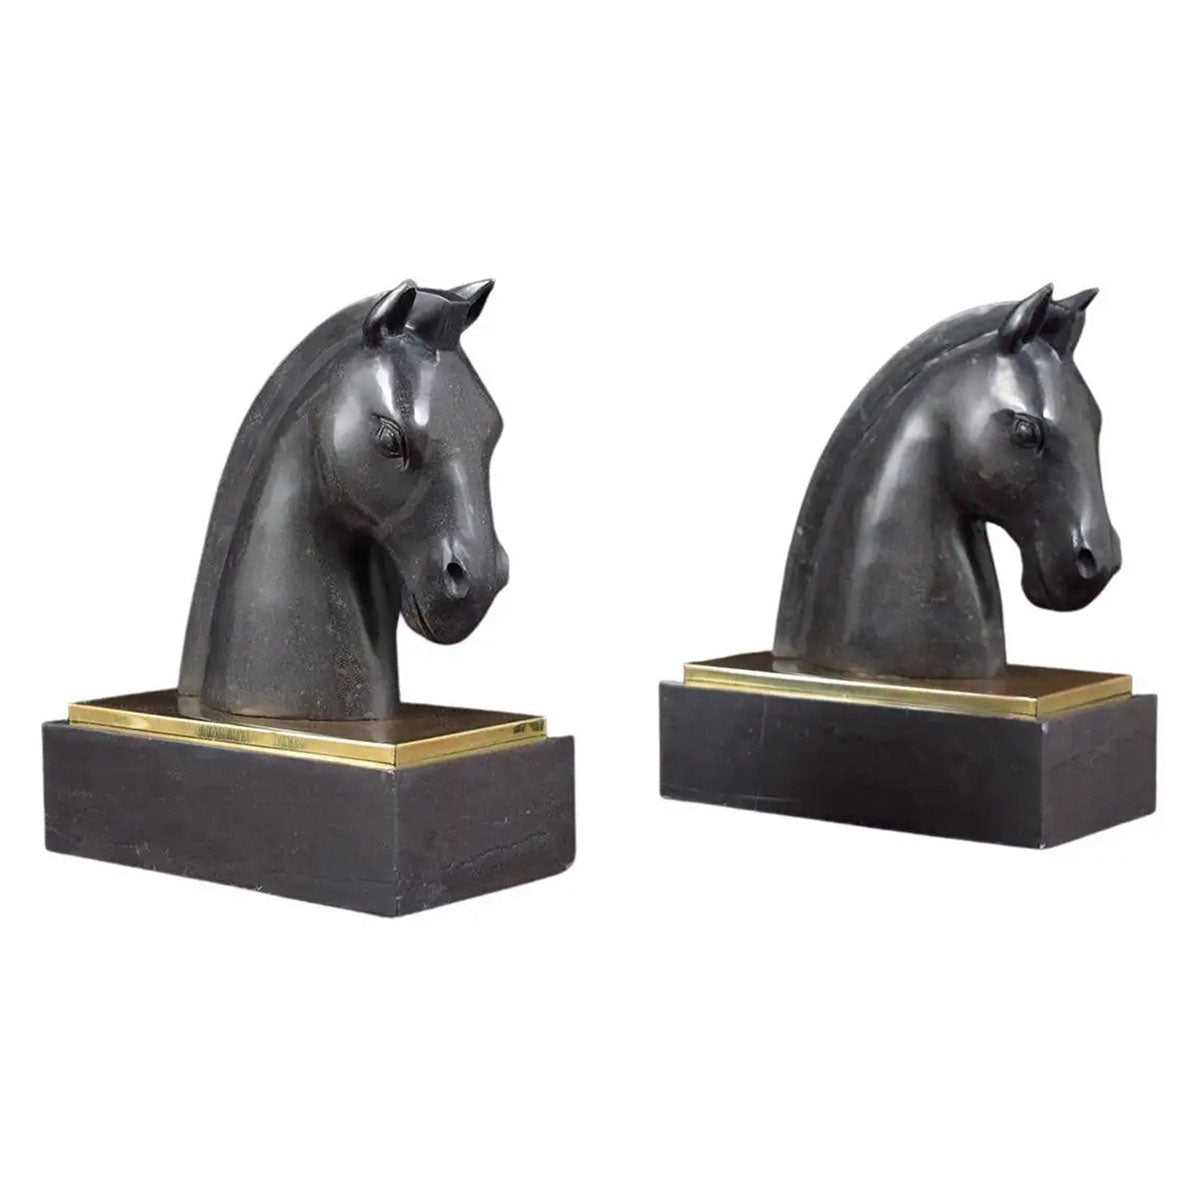 Unique Vintage 1950s Black Marble Horse Head Bookends with Brass